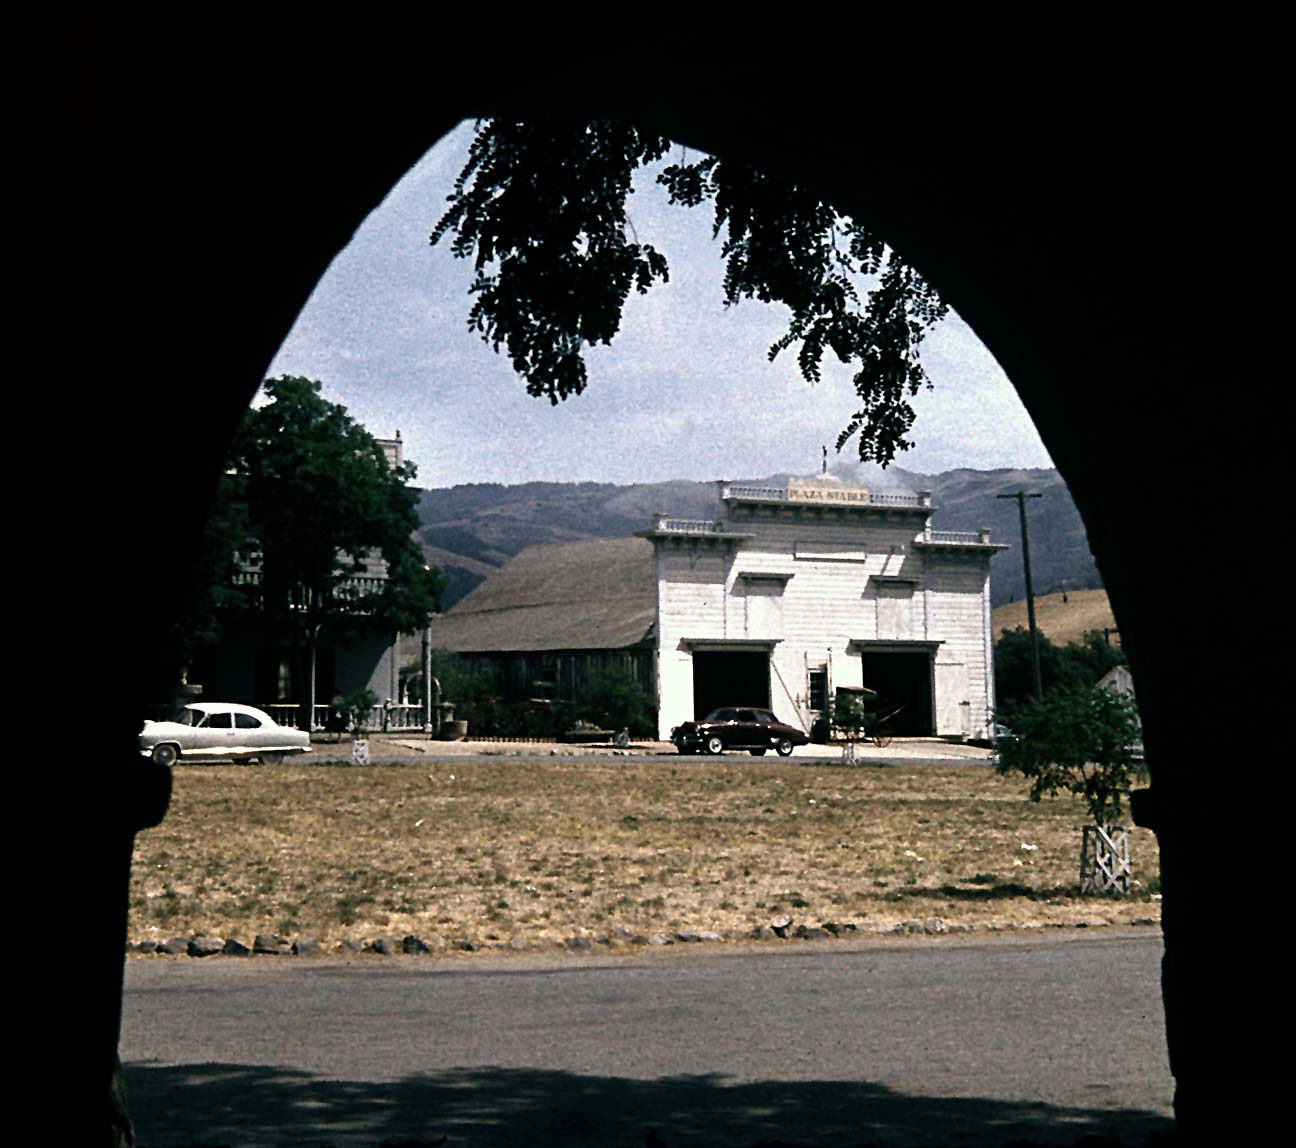 We don't think about livery stables much anymore, but  in 1951 we find the Plaza Livery Stable alive and well across from San Juan Bautista Mission in California.



Photo: Don Hall, Sr.

Don Hall
Yreka, CA